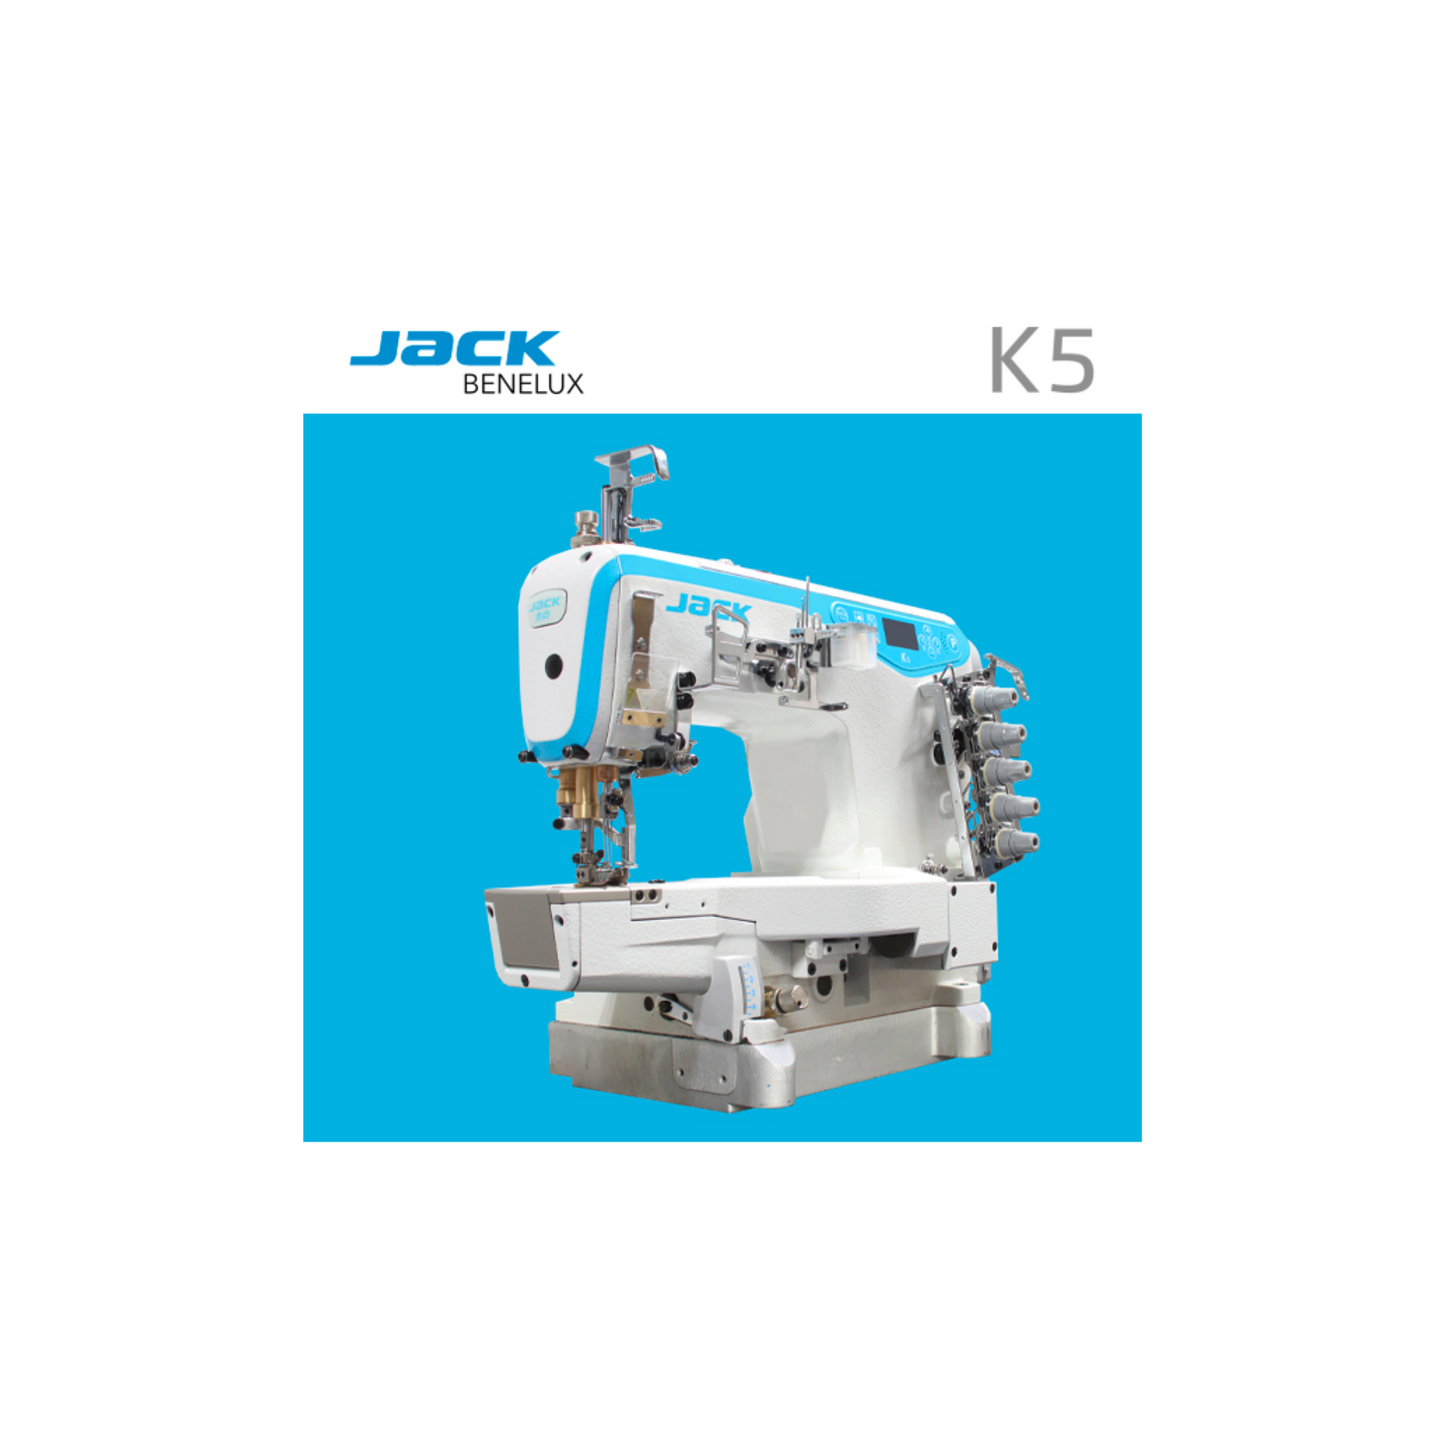 Jack K5-UT-01GB-x356 fully automatic cylinder arm coverstitch machine - Sewing machine - White - Side view